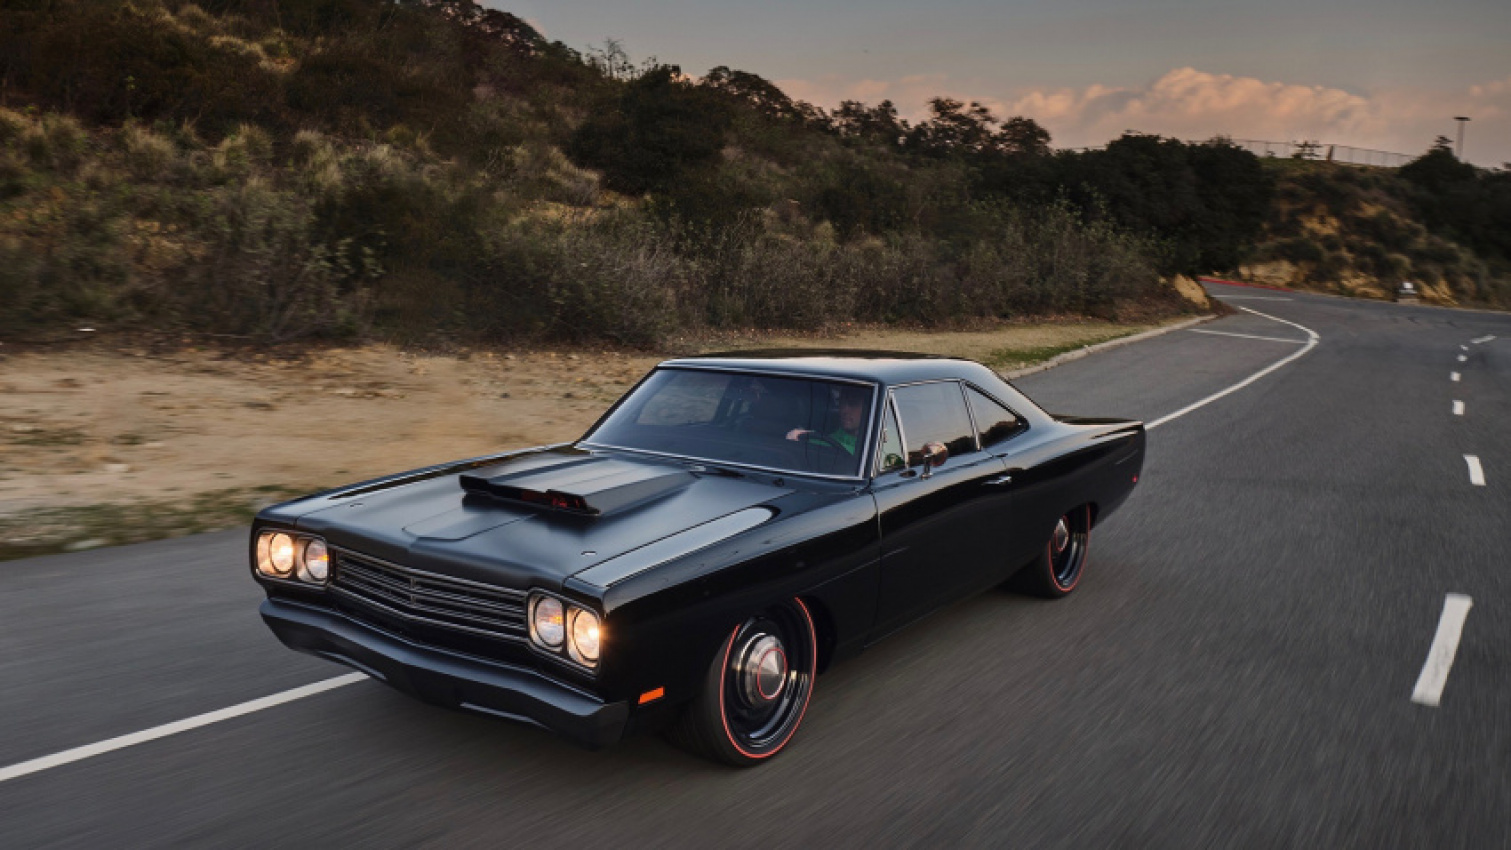 autos, cars, hp, plymouth, celebrities, classic cars, coupes, hemi, modified, mopar, muscle cars, plymouth road runner, kevin hart's 940-hp 1969 plymouth road runner build is named “michael meyers”